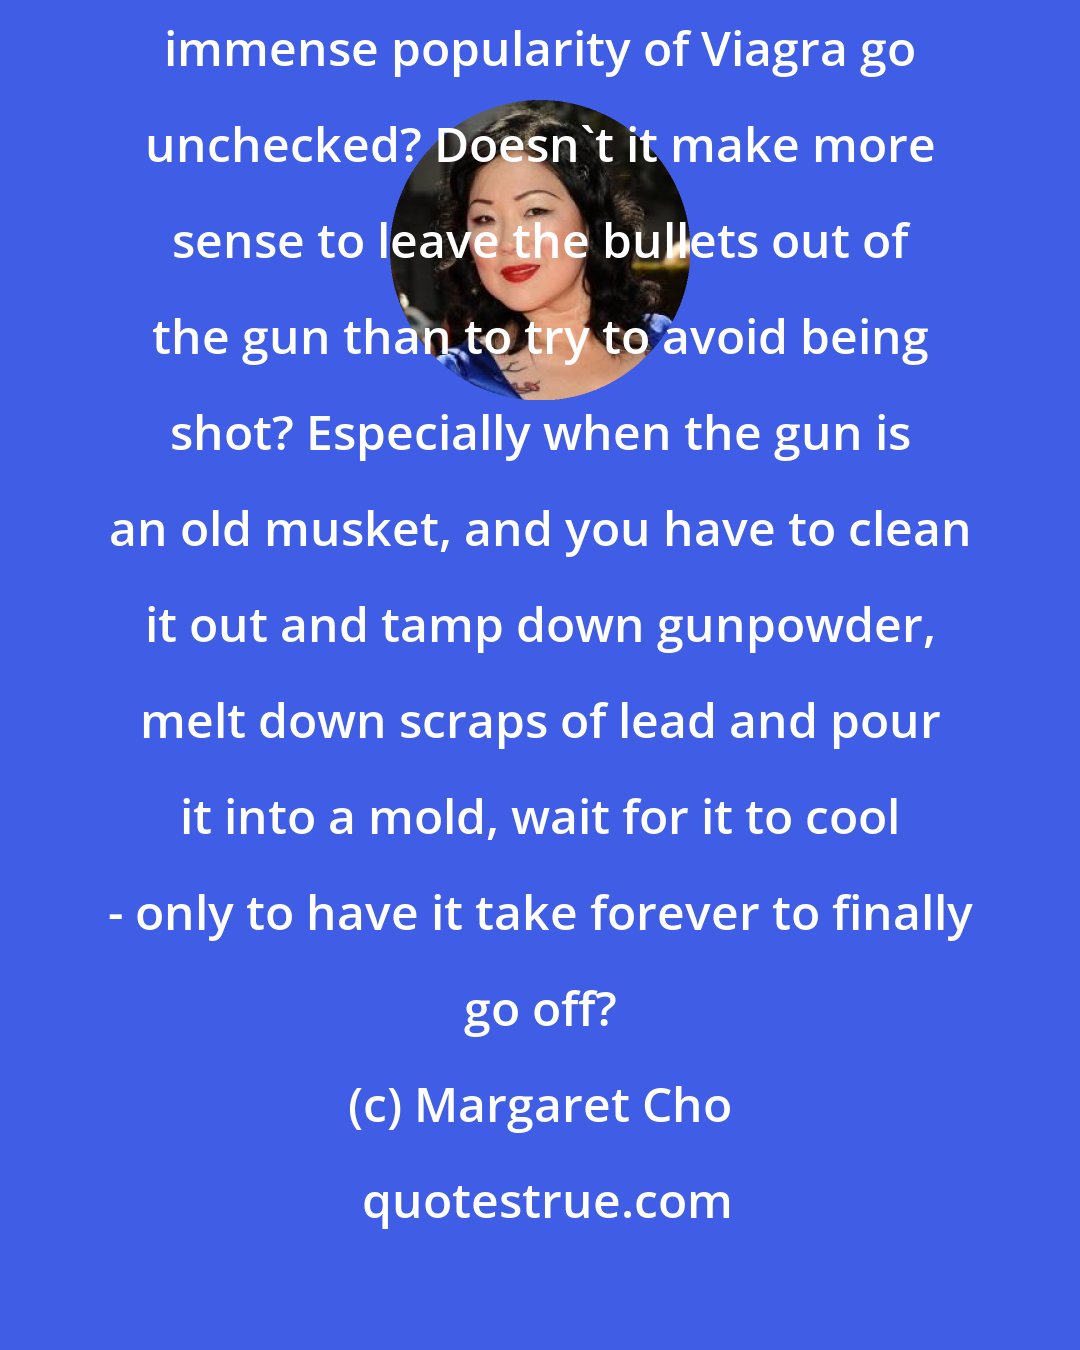 Margaret Cho: And if the problem [with contraception] is promiscuity, then why does the immense popularity of Viagra go unchecked? Doesn't it make more sense to leave the bullets out of the gun than to try to avoid being shot? Especially when the gun is an old musket, and you have to clean it out and tamp down gunpowder, melt down scraps of lead and pour it into a mold, wait for it to cool - only to have it take forever to finally go off?